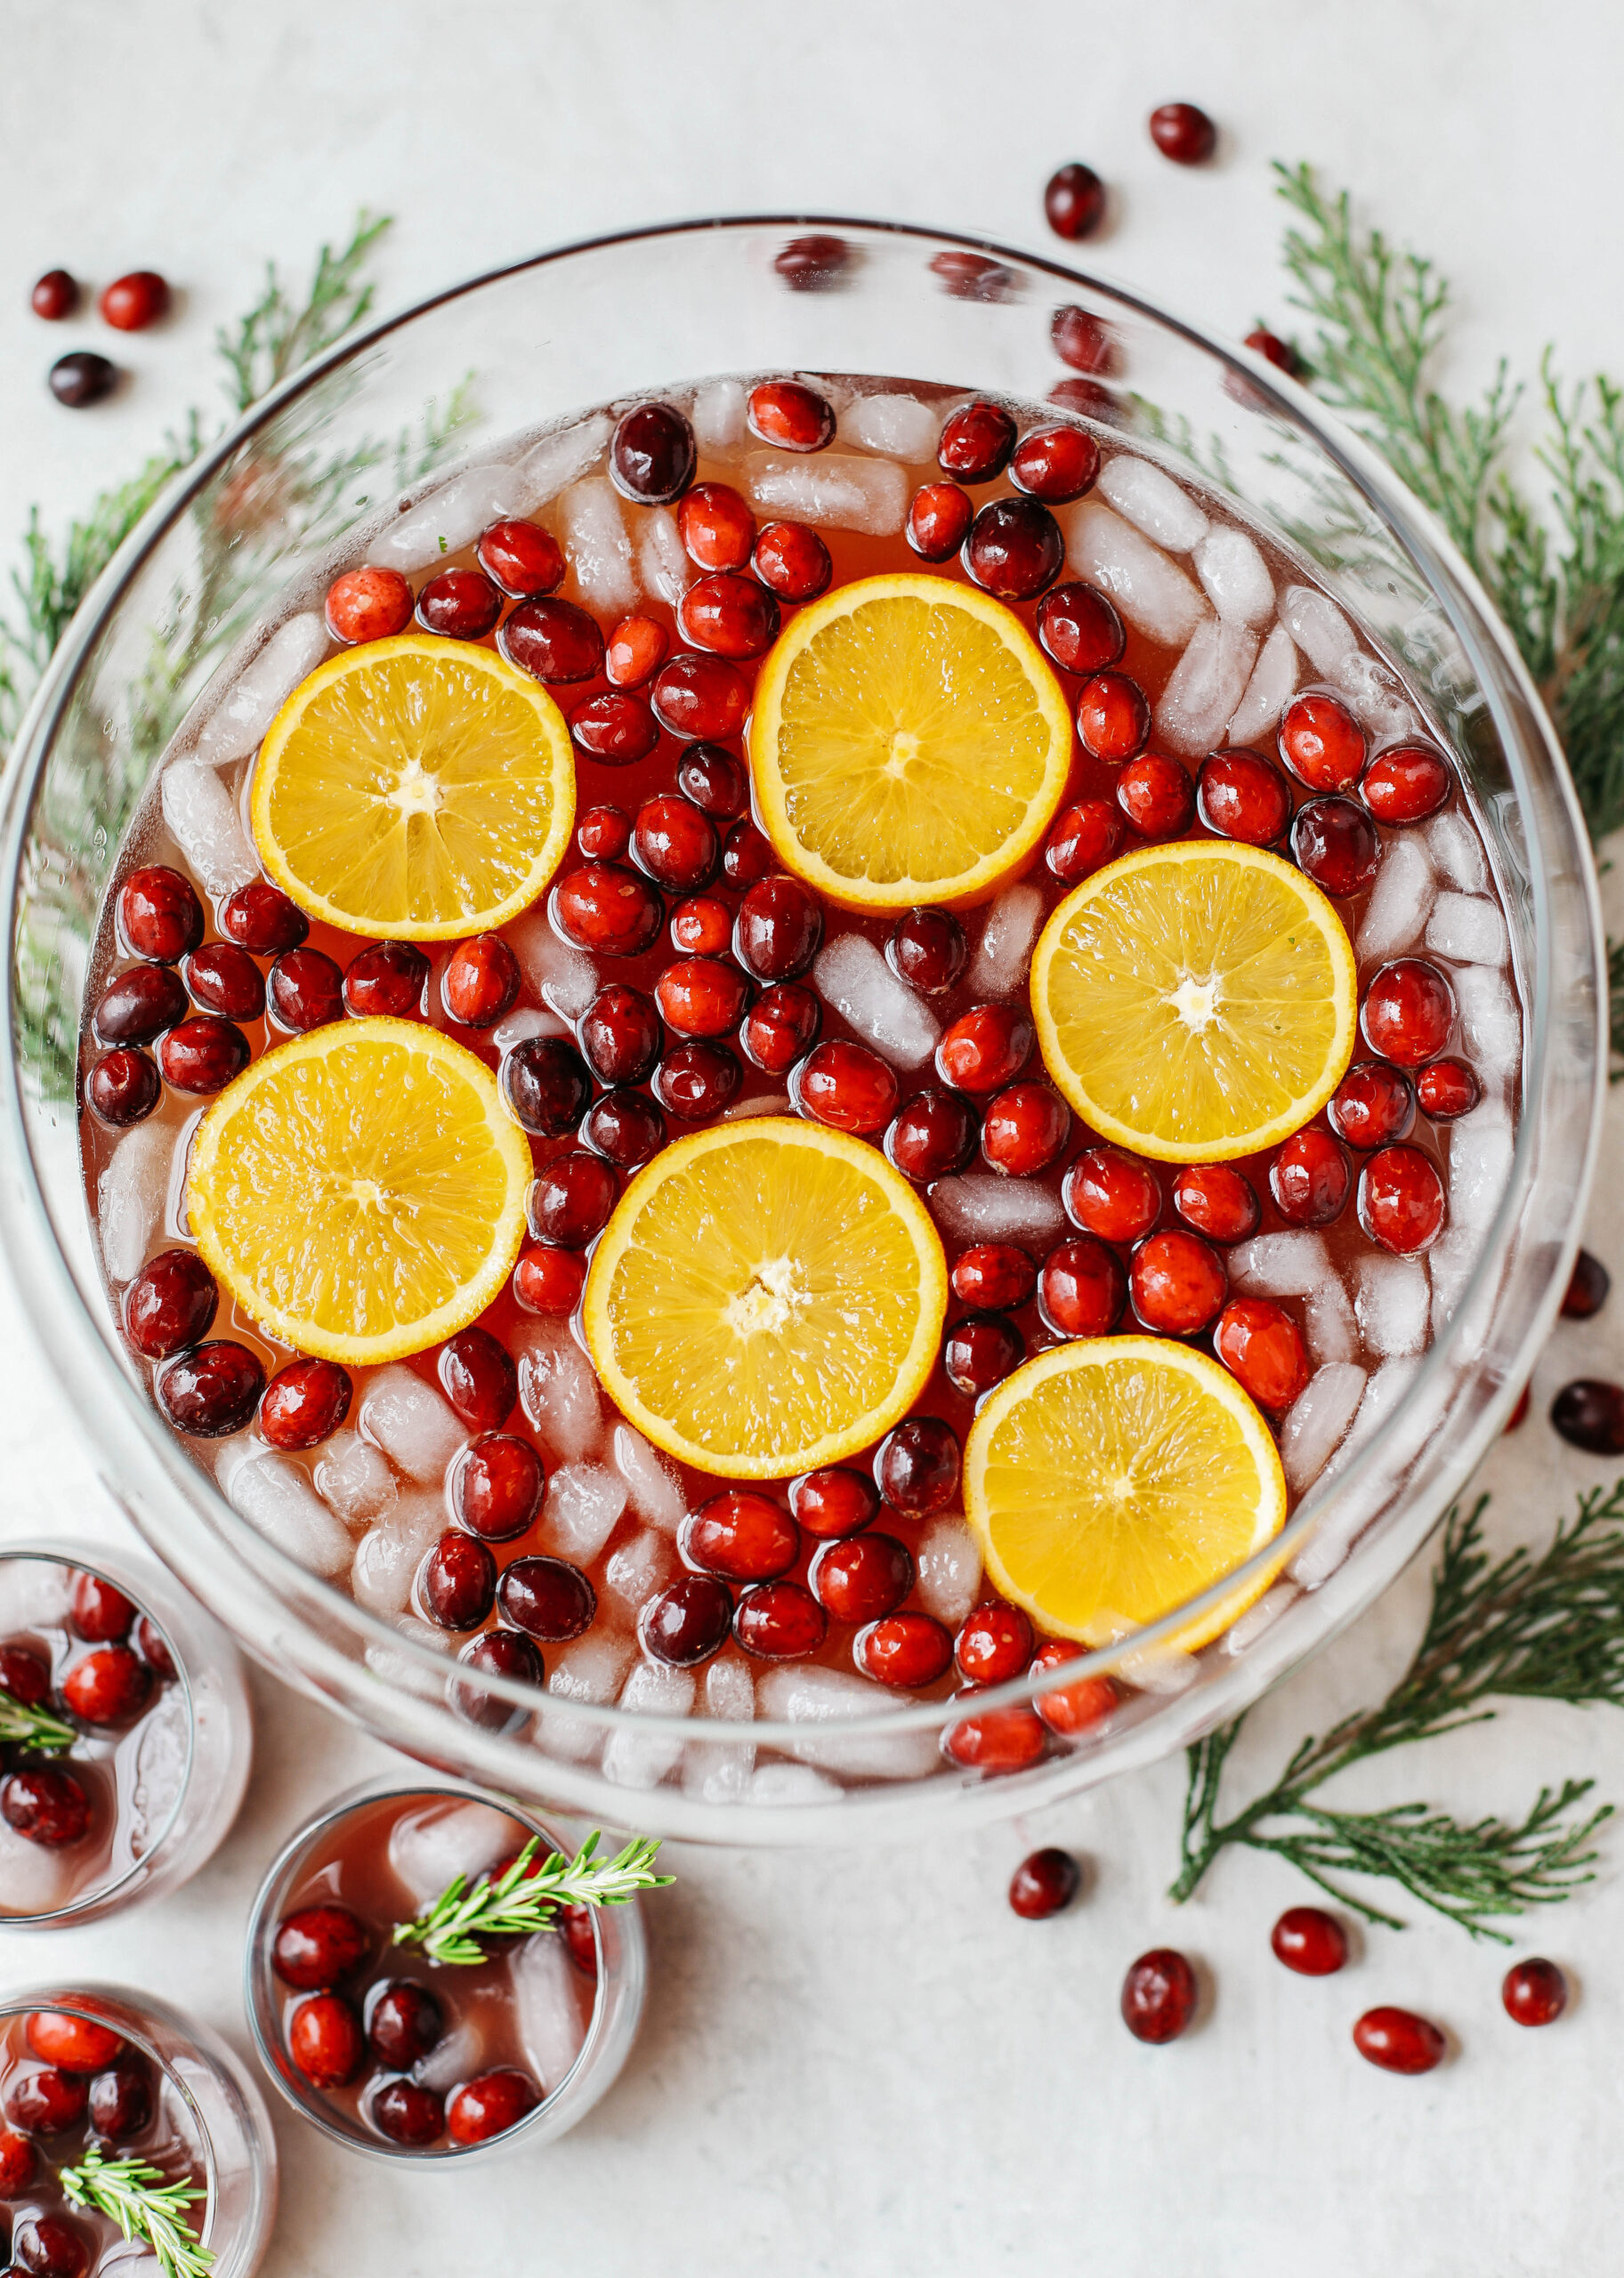 This Sparkling Christmas Punch makes the perfect addition to any holiday party or gathering with a delicious blend of cranberries and oranges all marinated together in one festive cocktail!